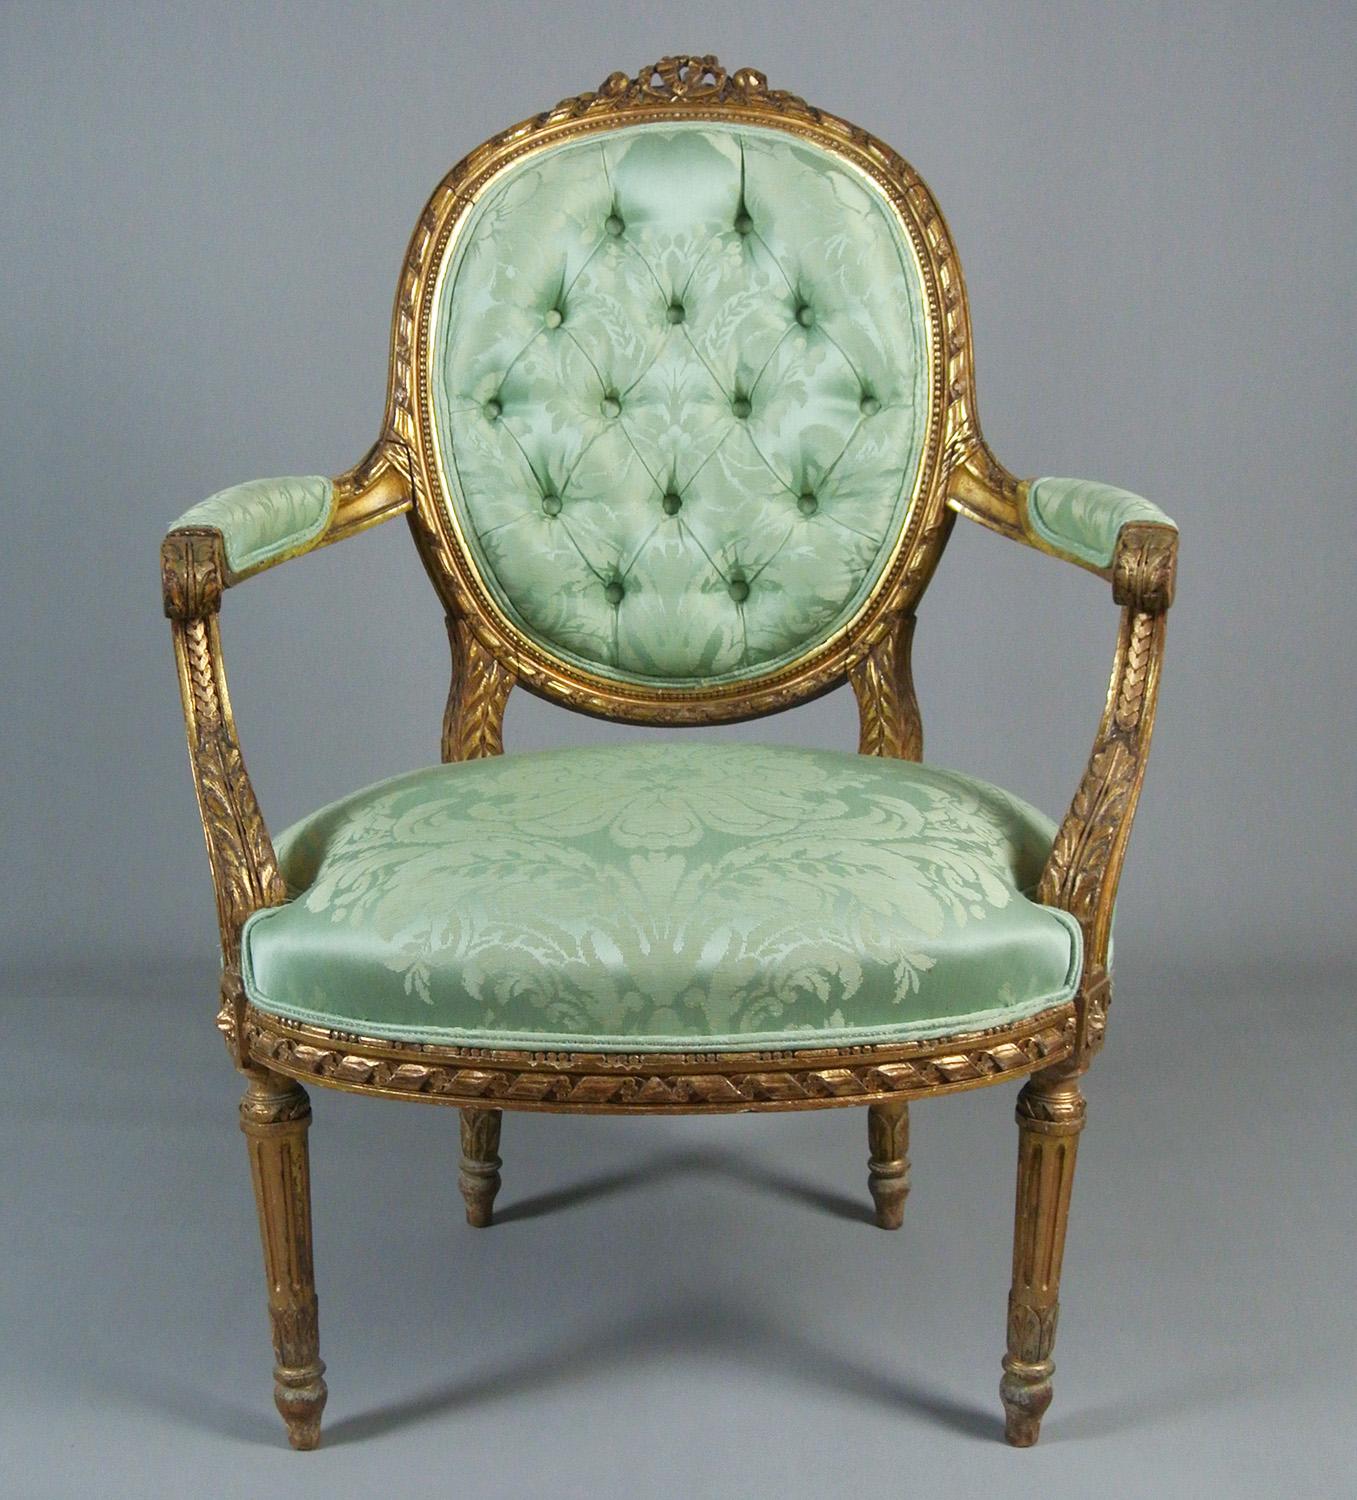 Newly upholstered in a spring green pure silk from the Gainsborough Silk Weaving Company (thickly woven from an original 18th century fabric pattern) and with double piped and button back original detailing.

With anthemion and ribbon carving to the